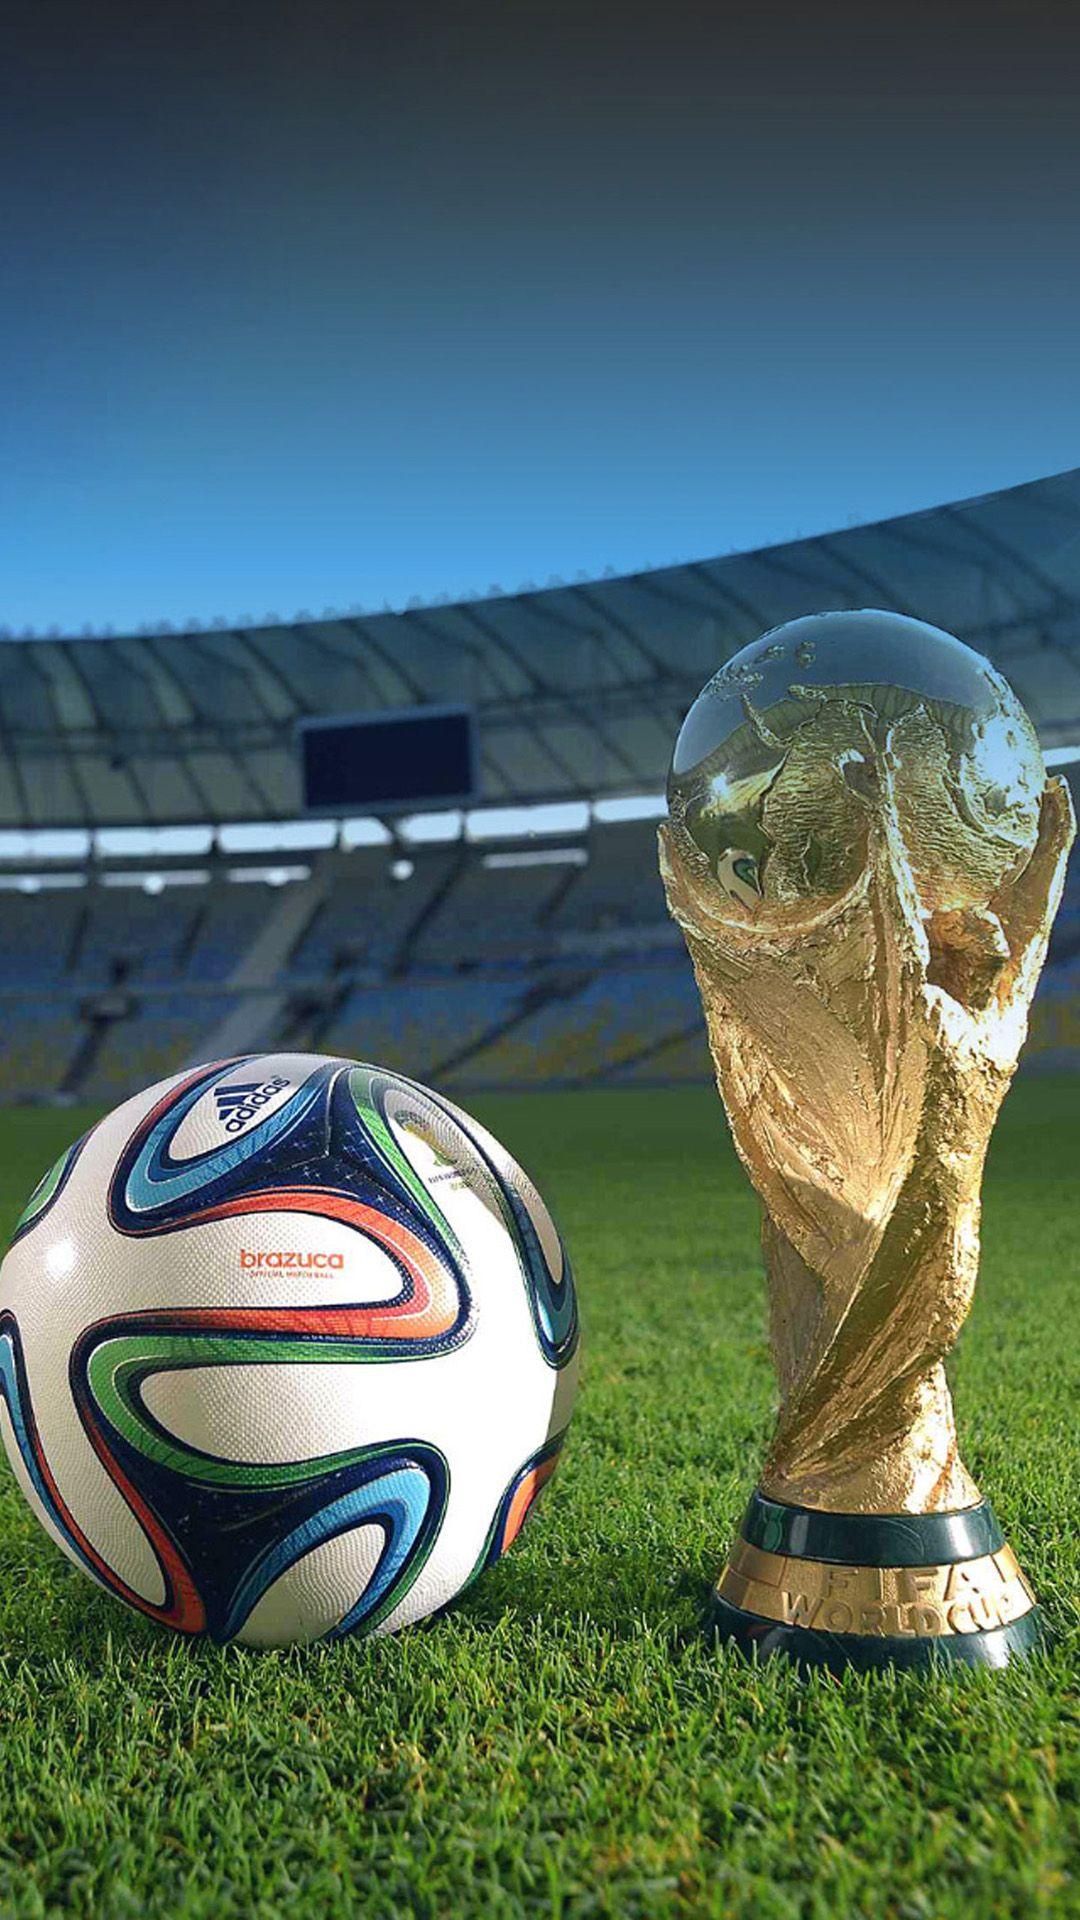 World Cup 2014 Brazil Trophy And Brazuca Ball Android Wallpaper free download